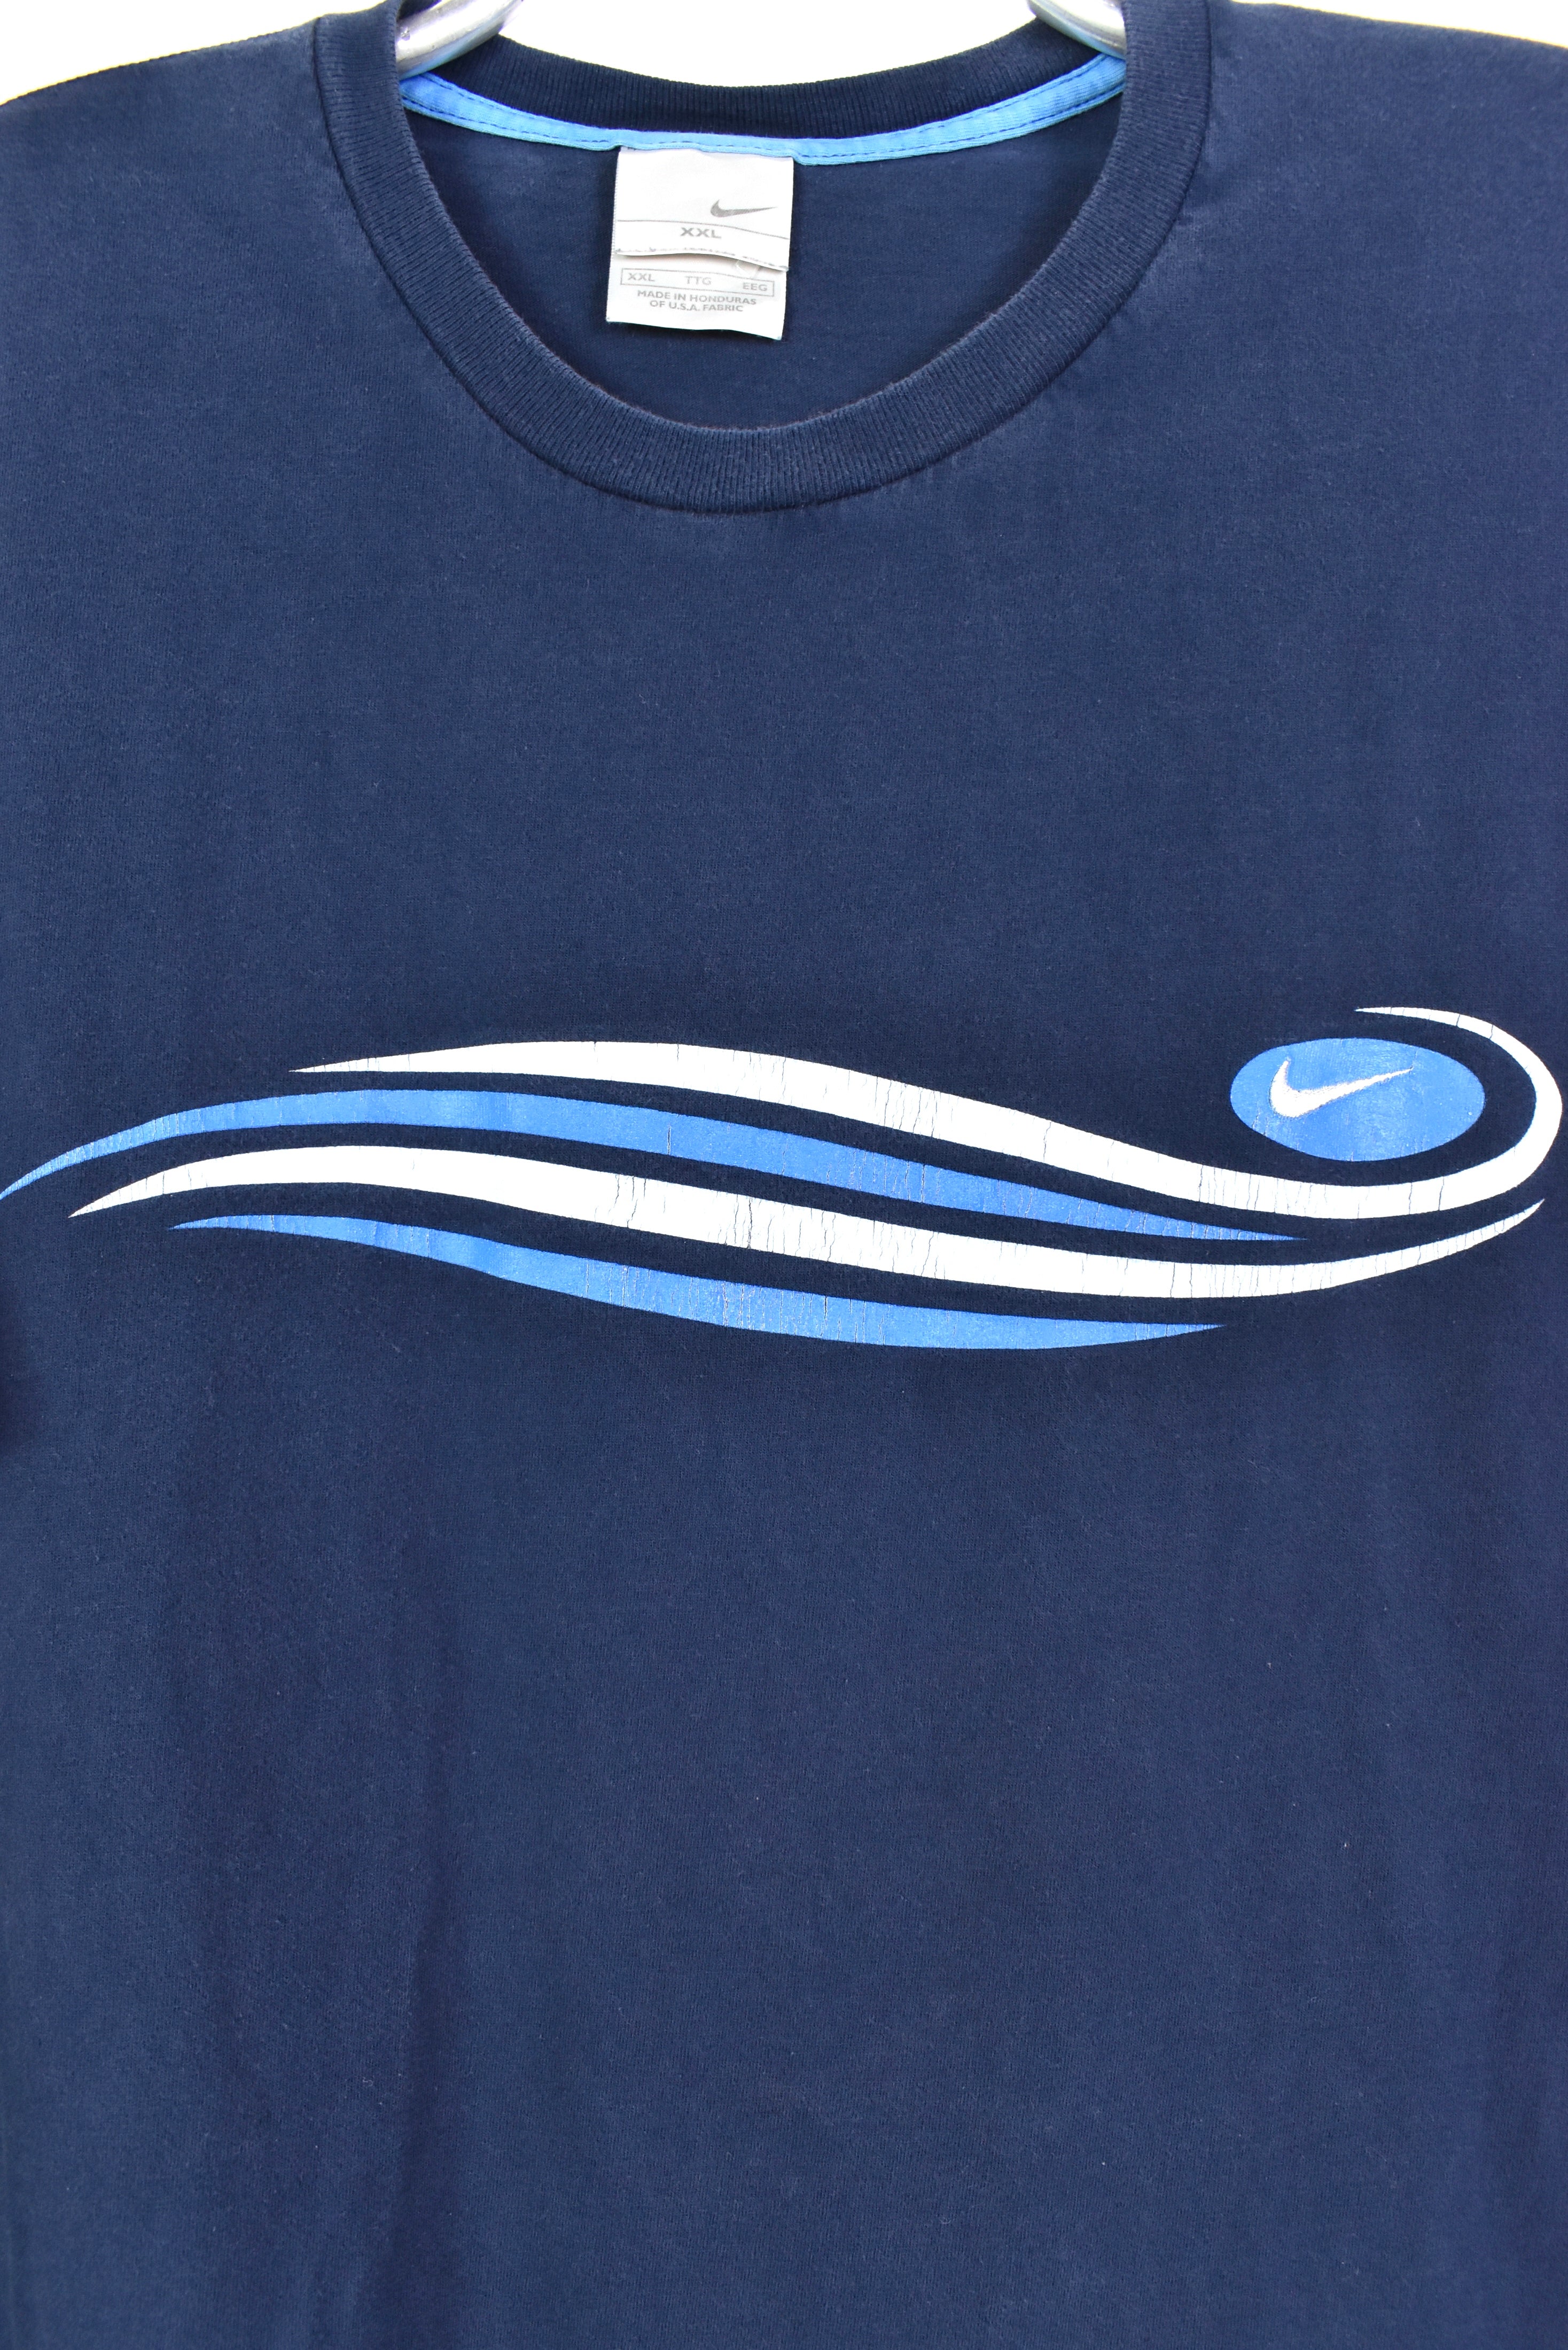 Vintage Nike embroidered navy t-shirt | XL NIKE